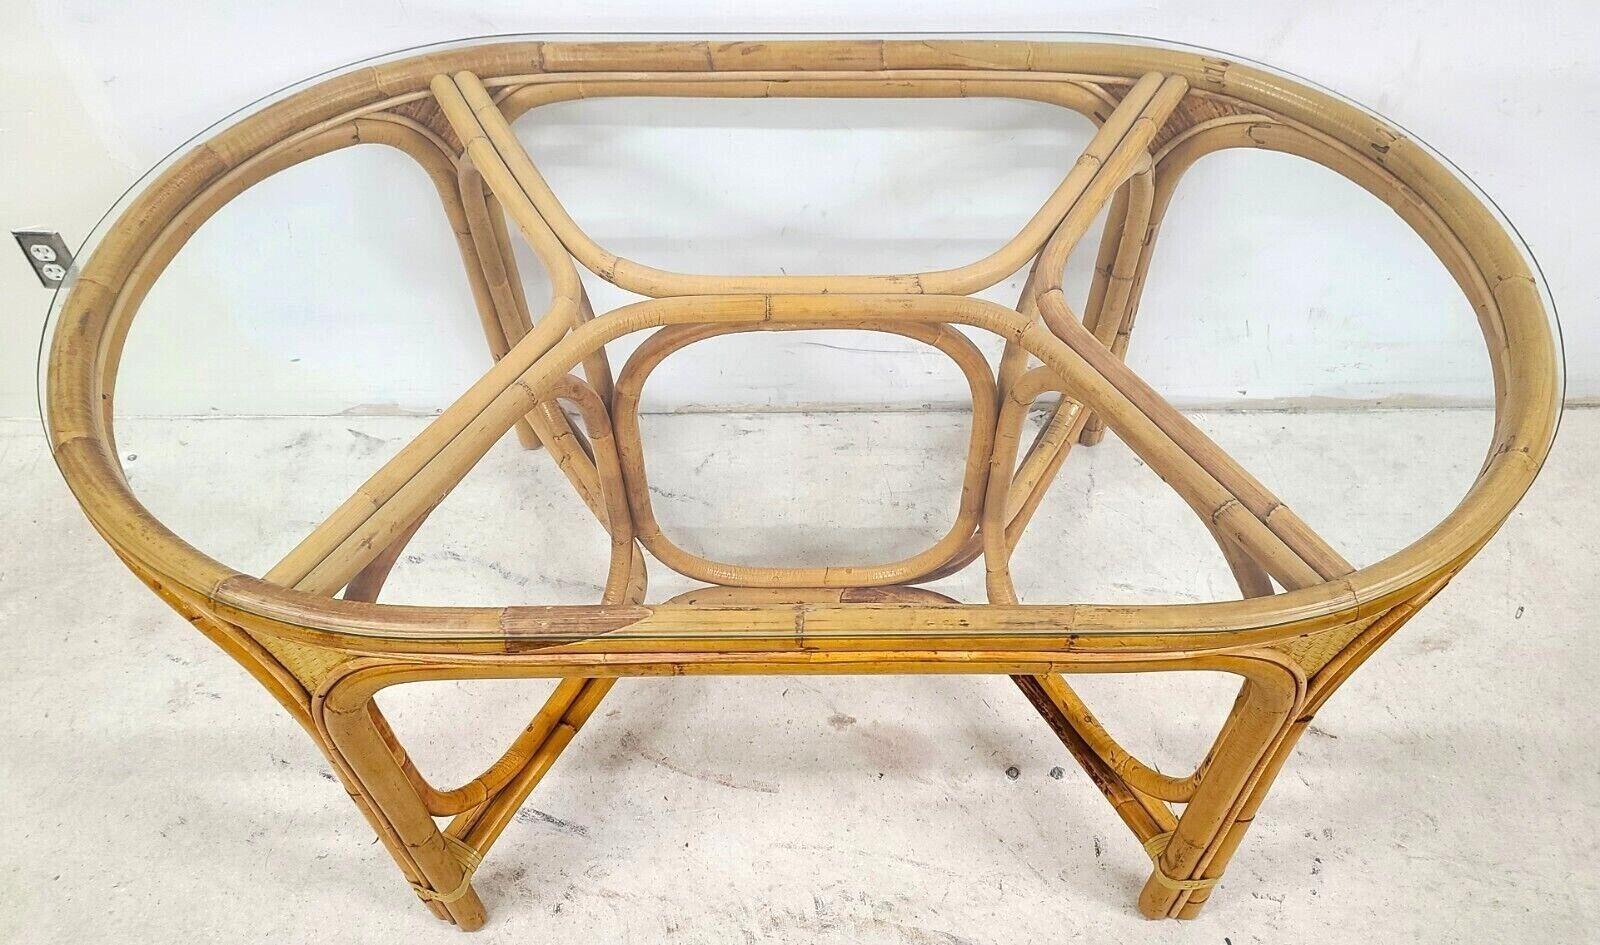 Vintage 1970s Bamboo Rattan Glass Oval Dining Table For Sale 1